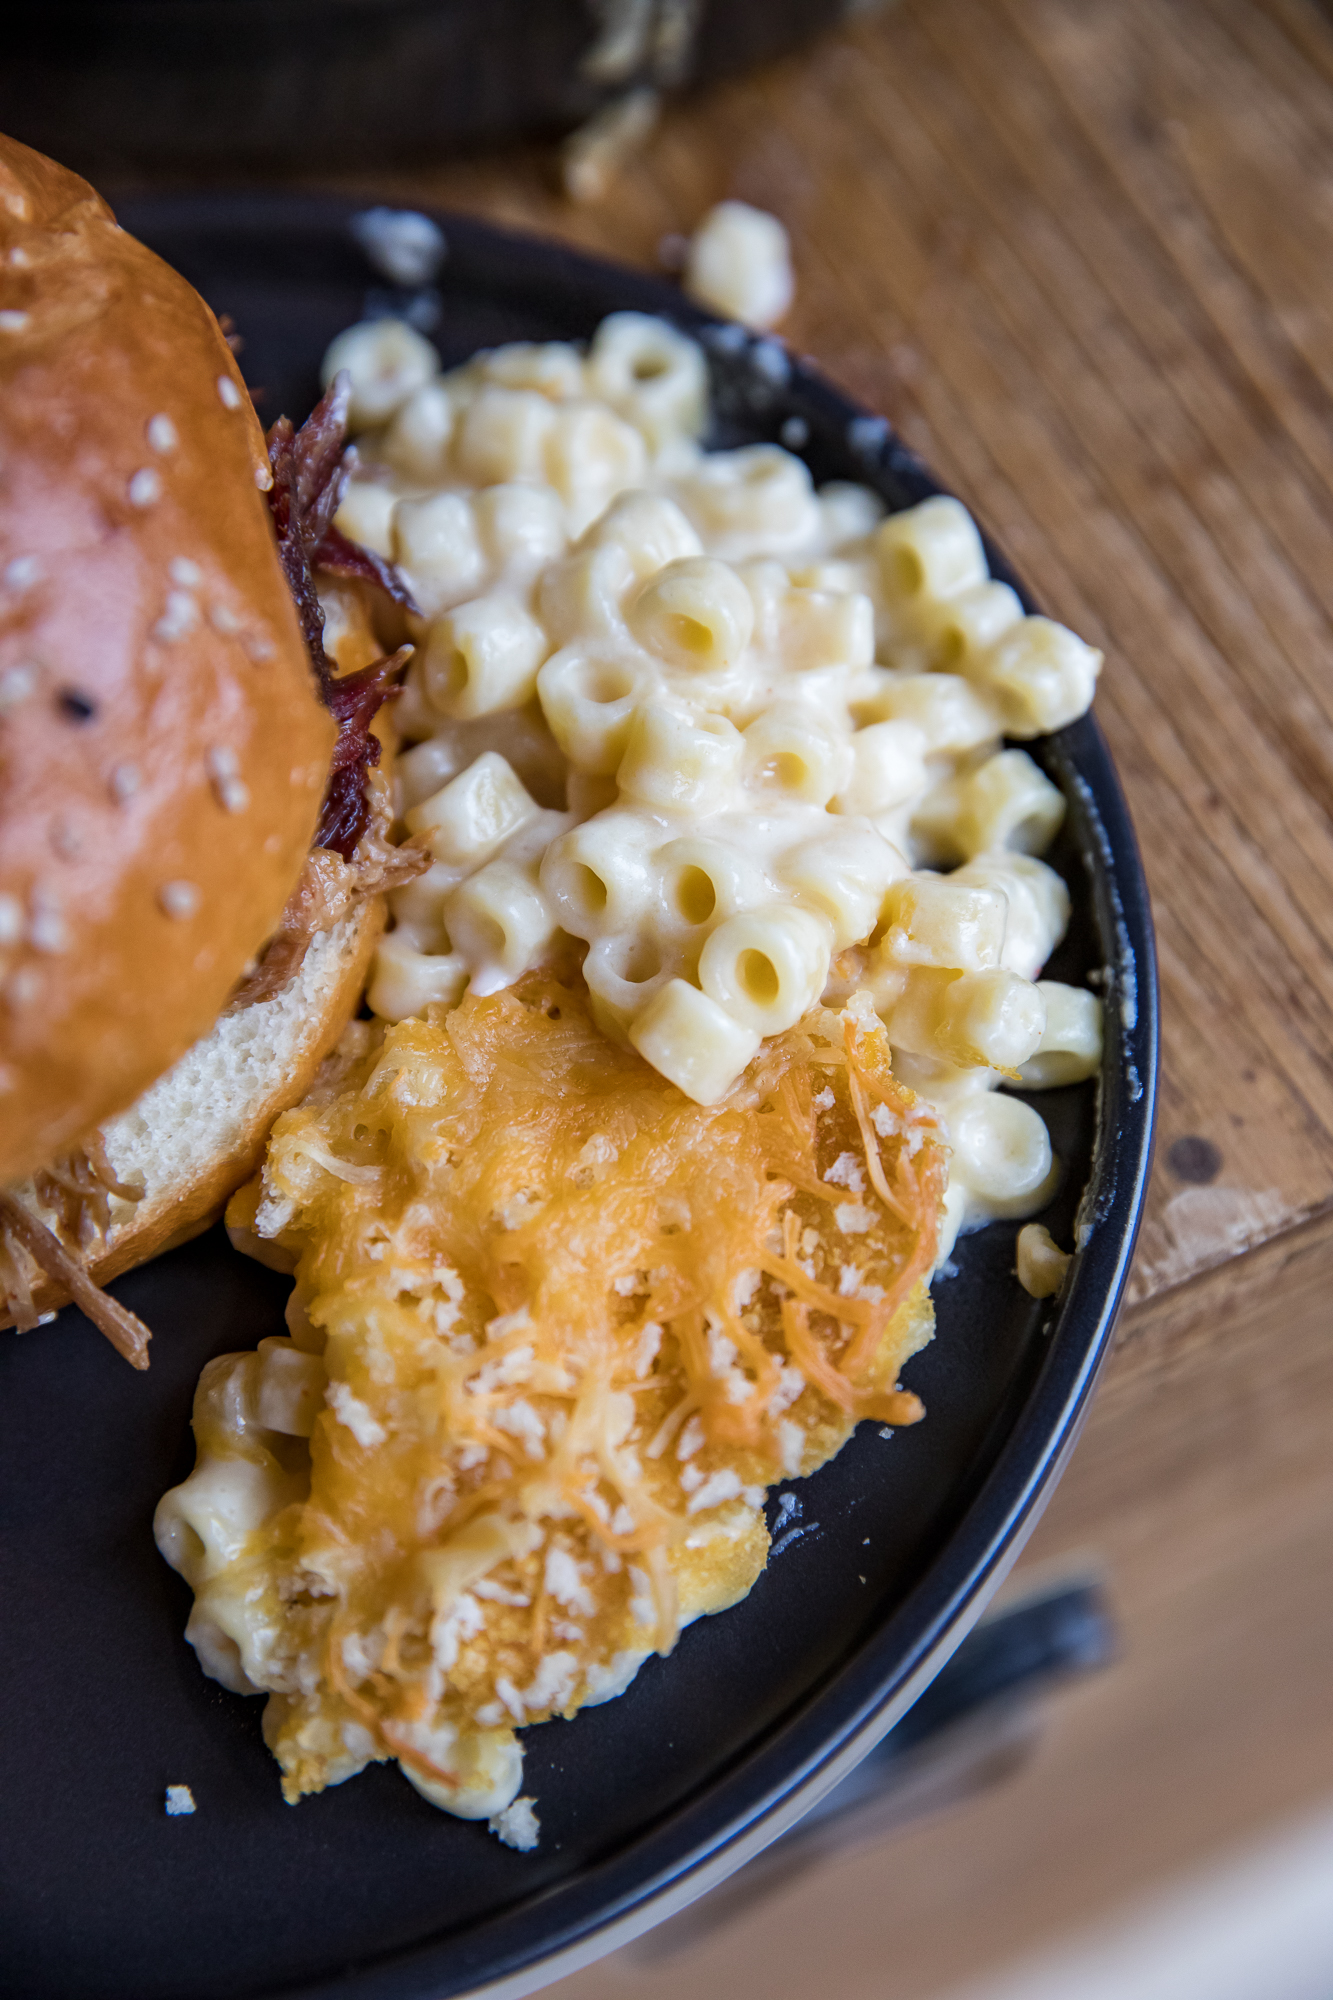 Traeger Smoked Mac and Cheese - Easy grilled macaroni and cheese